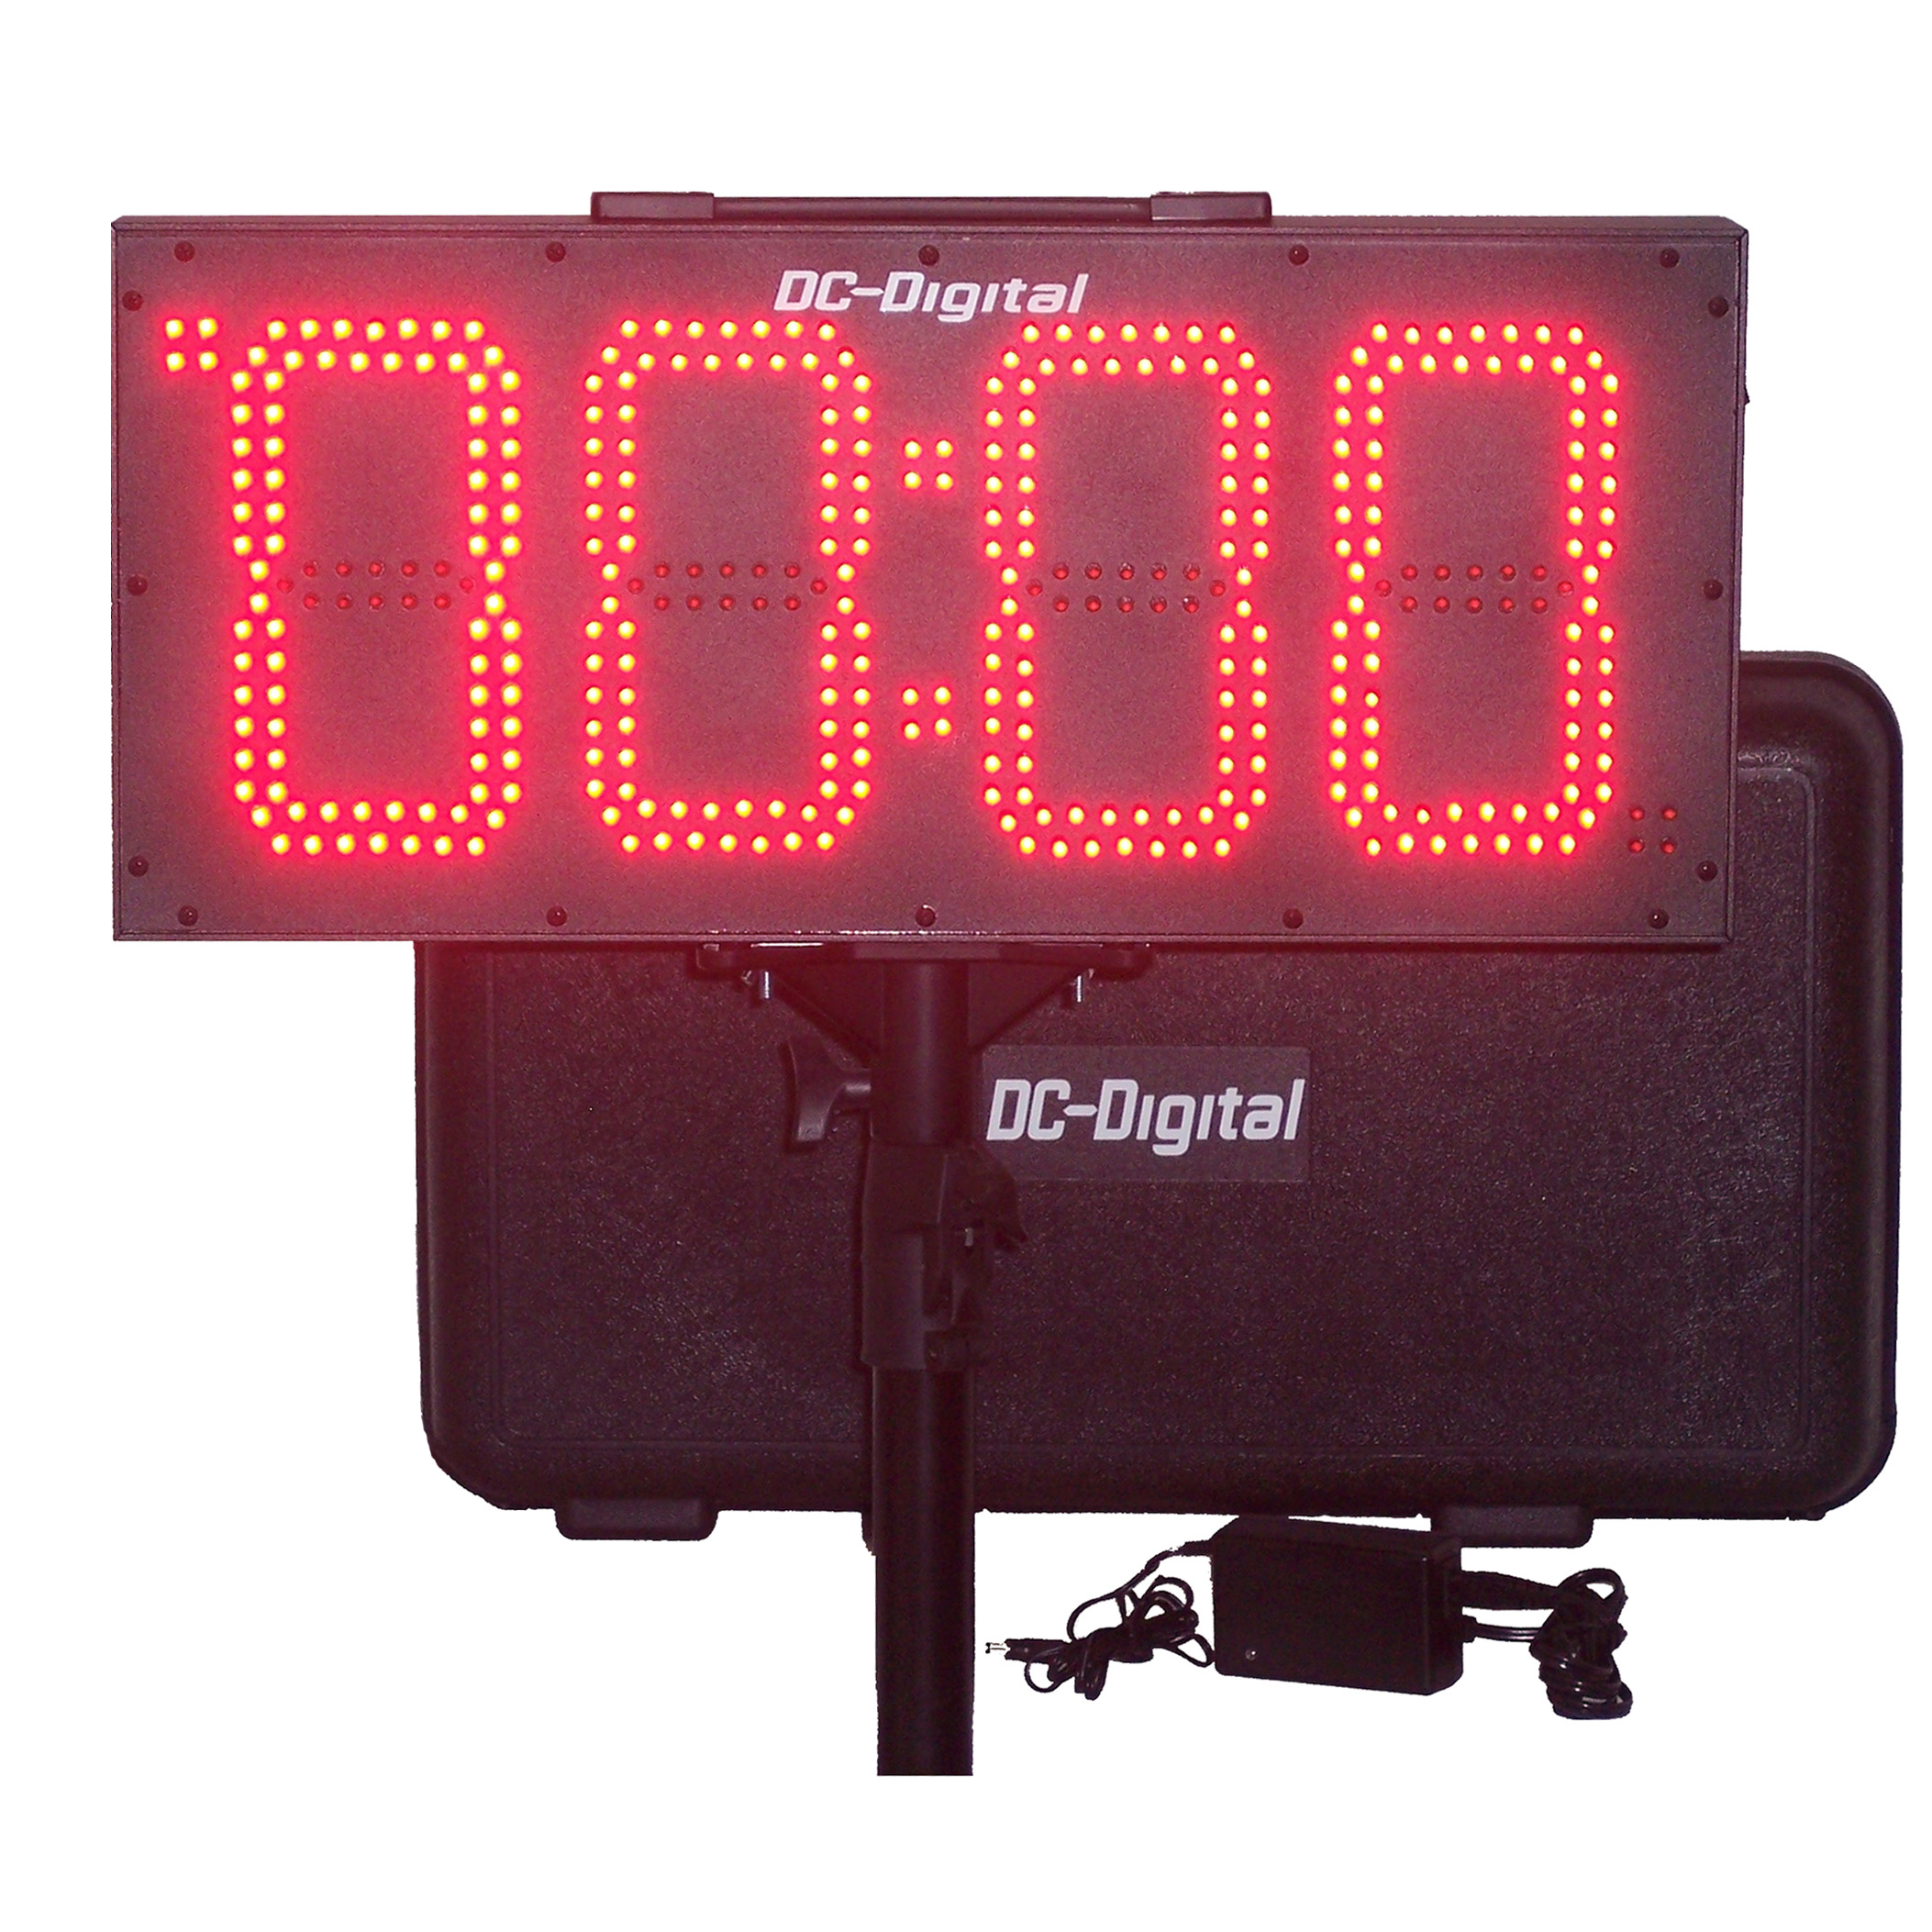 (DC-80UT-BTC) Portable 8.0 Inch LED Digit, Multi-Function, Multipurpose Sport (Counts Up, Counts Down and Time of Day Clock), Battery Operated, Digital Timer-Clock, Environmentally Sealed Push-Button Controlled , Carrying handle, Carrying Case, Tripod with Mount and Battery Charger (INDOOR/OUTDOOR)